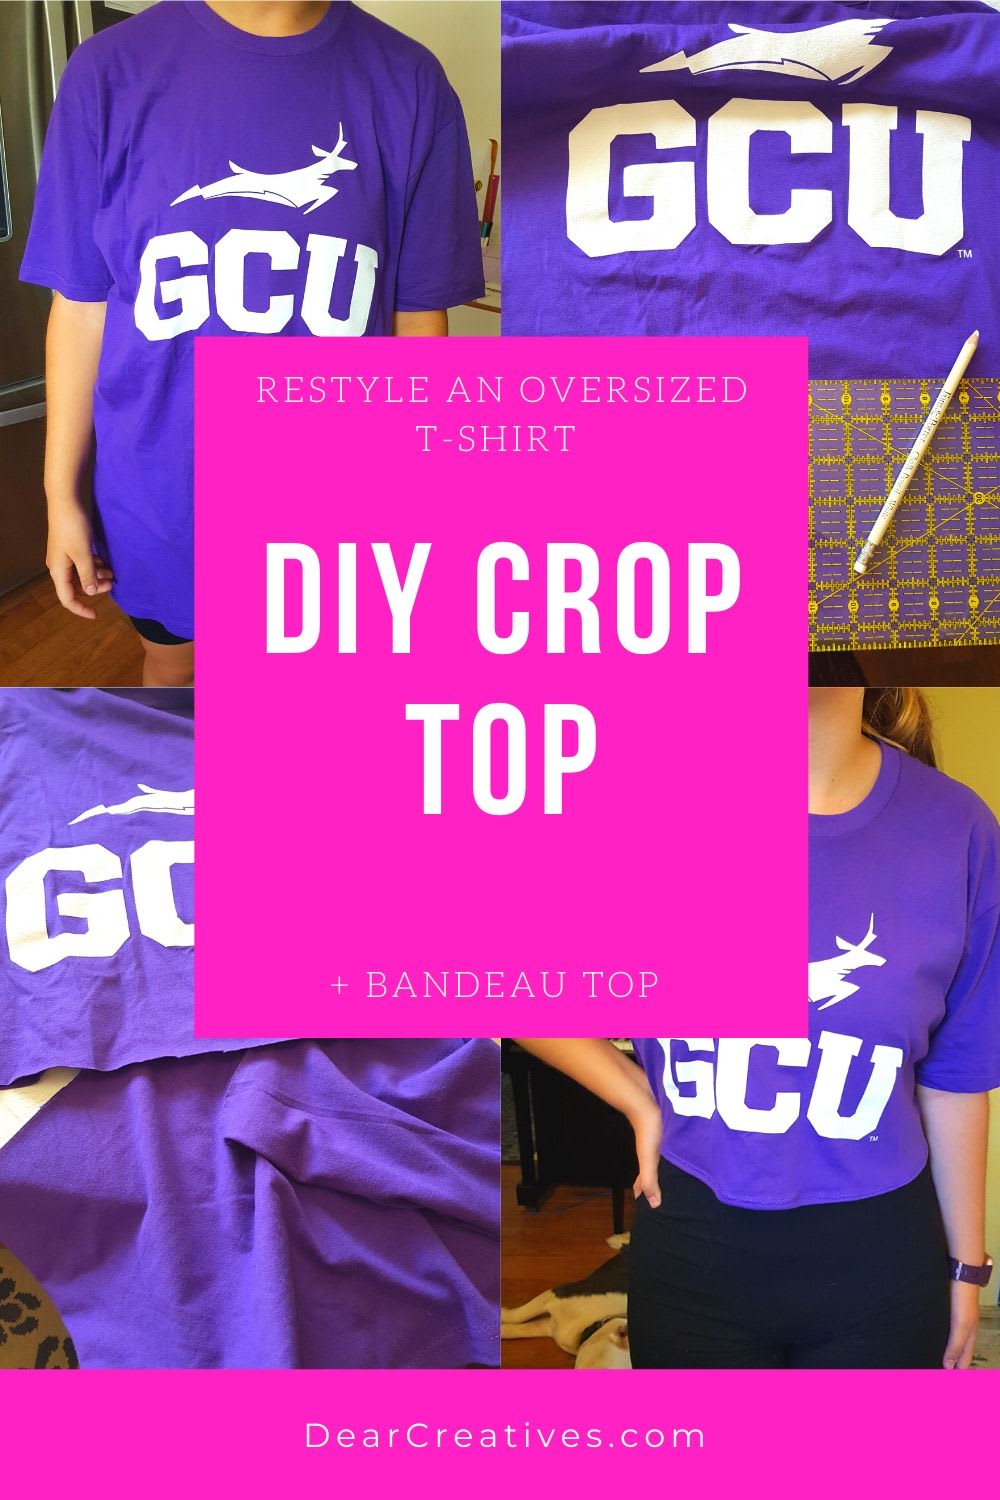 DIY Crop Top - Sew And No Sew Instructions